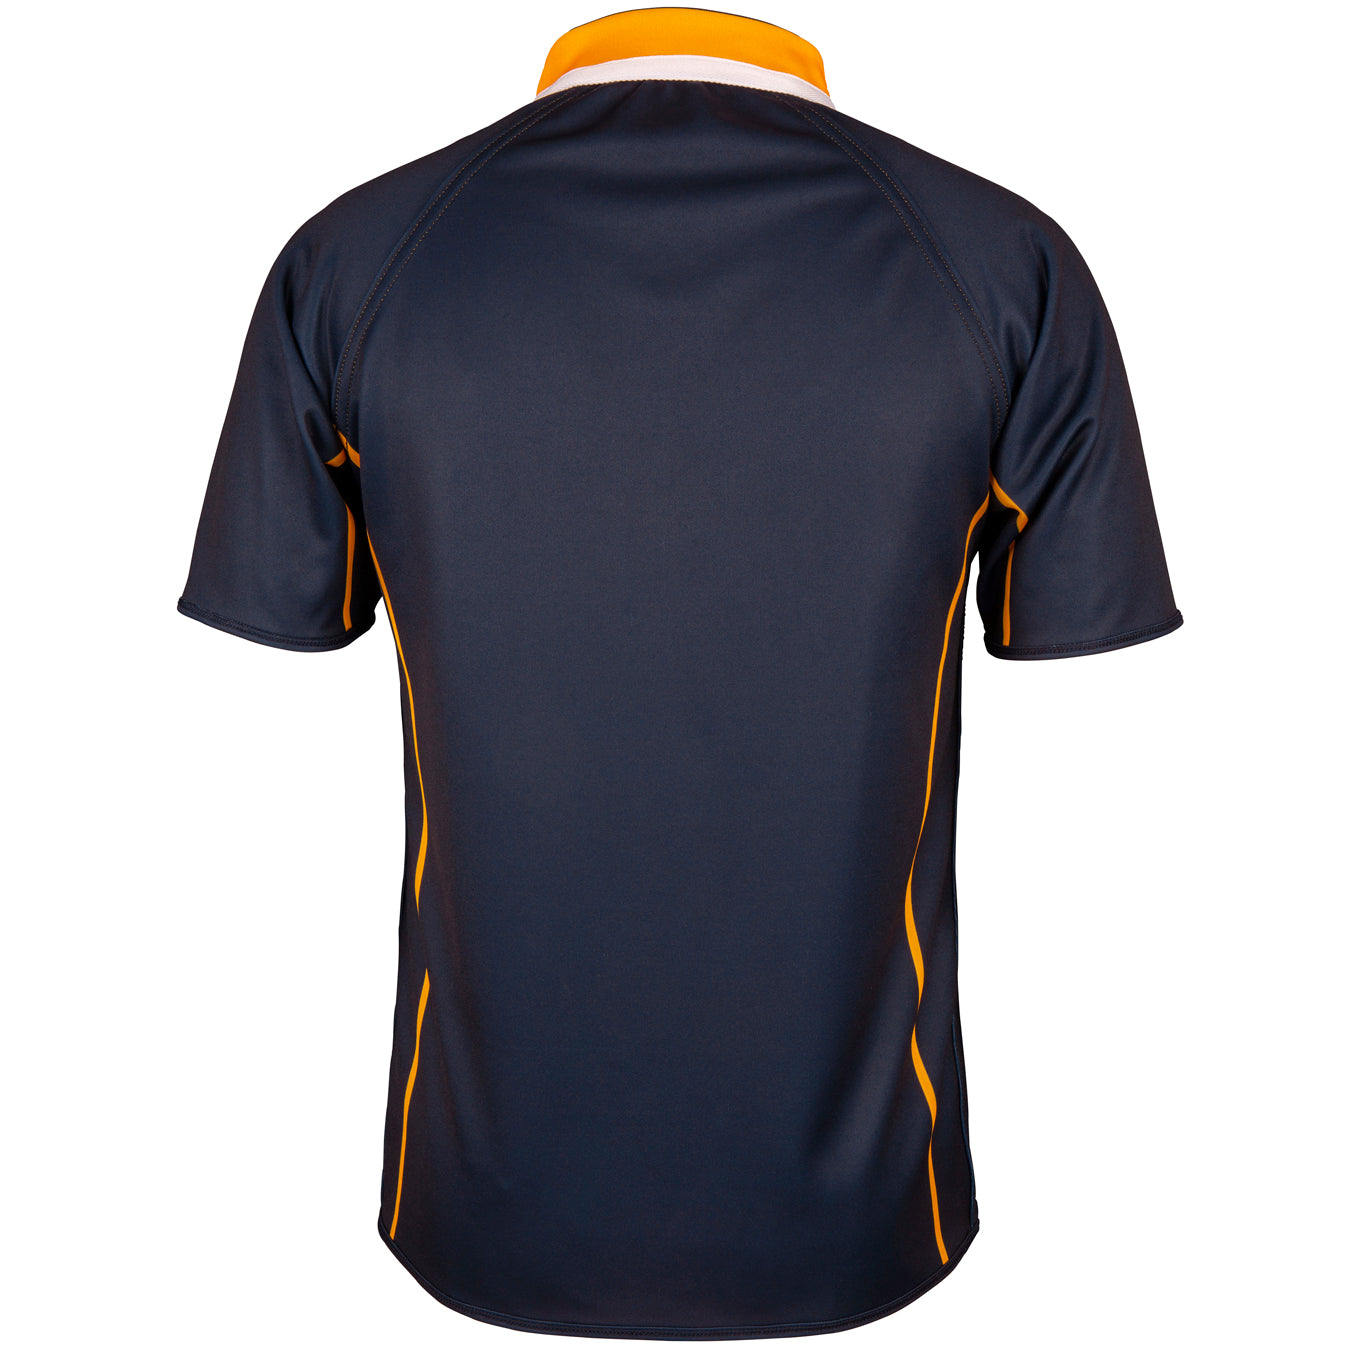 rcta18worth school reversible sublimated mens rugby shirt outside, back.jpg